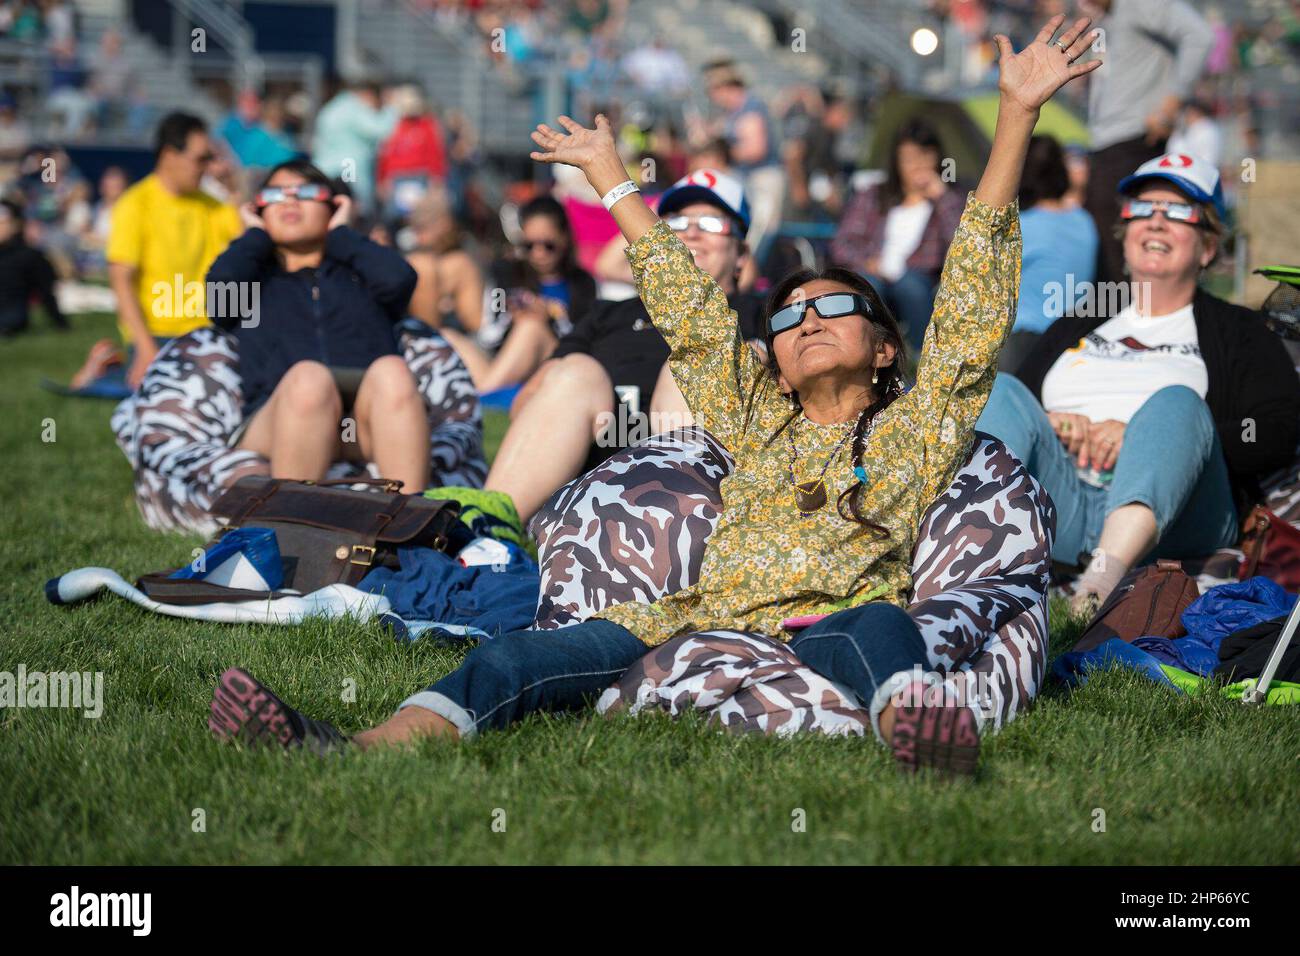 People are seen as they watch a total solar eclipse through protective glasses in Madras, Oregon on Monday, Aug. 21, 2017 Stock Photo